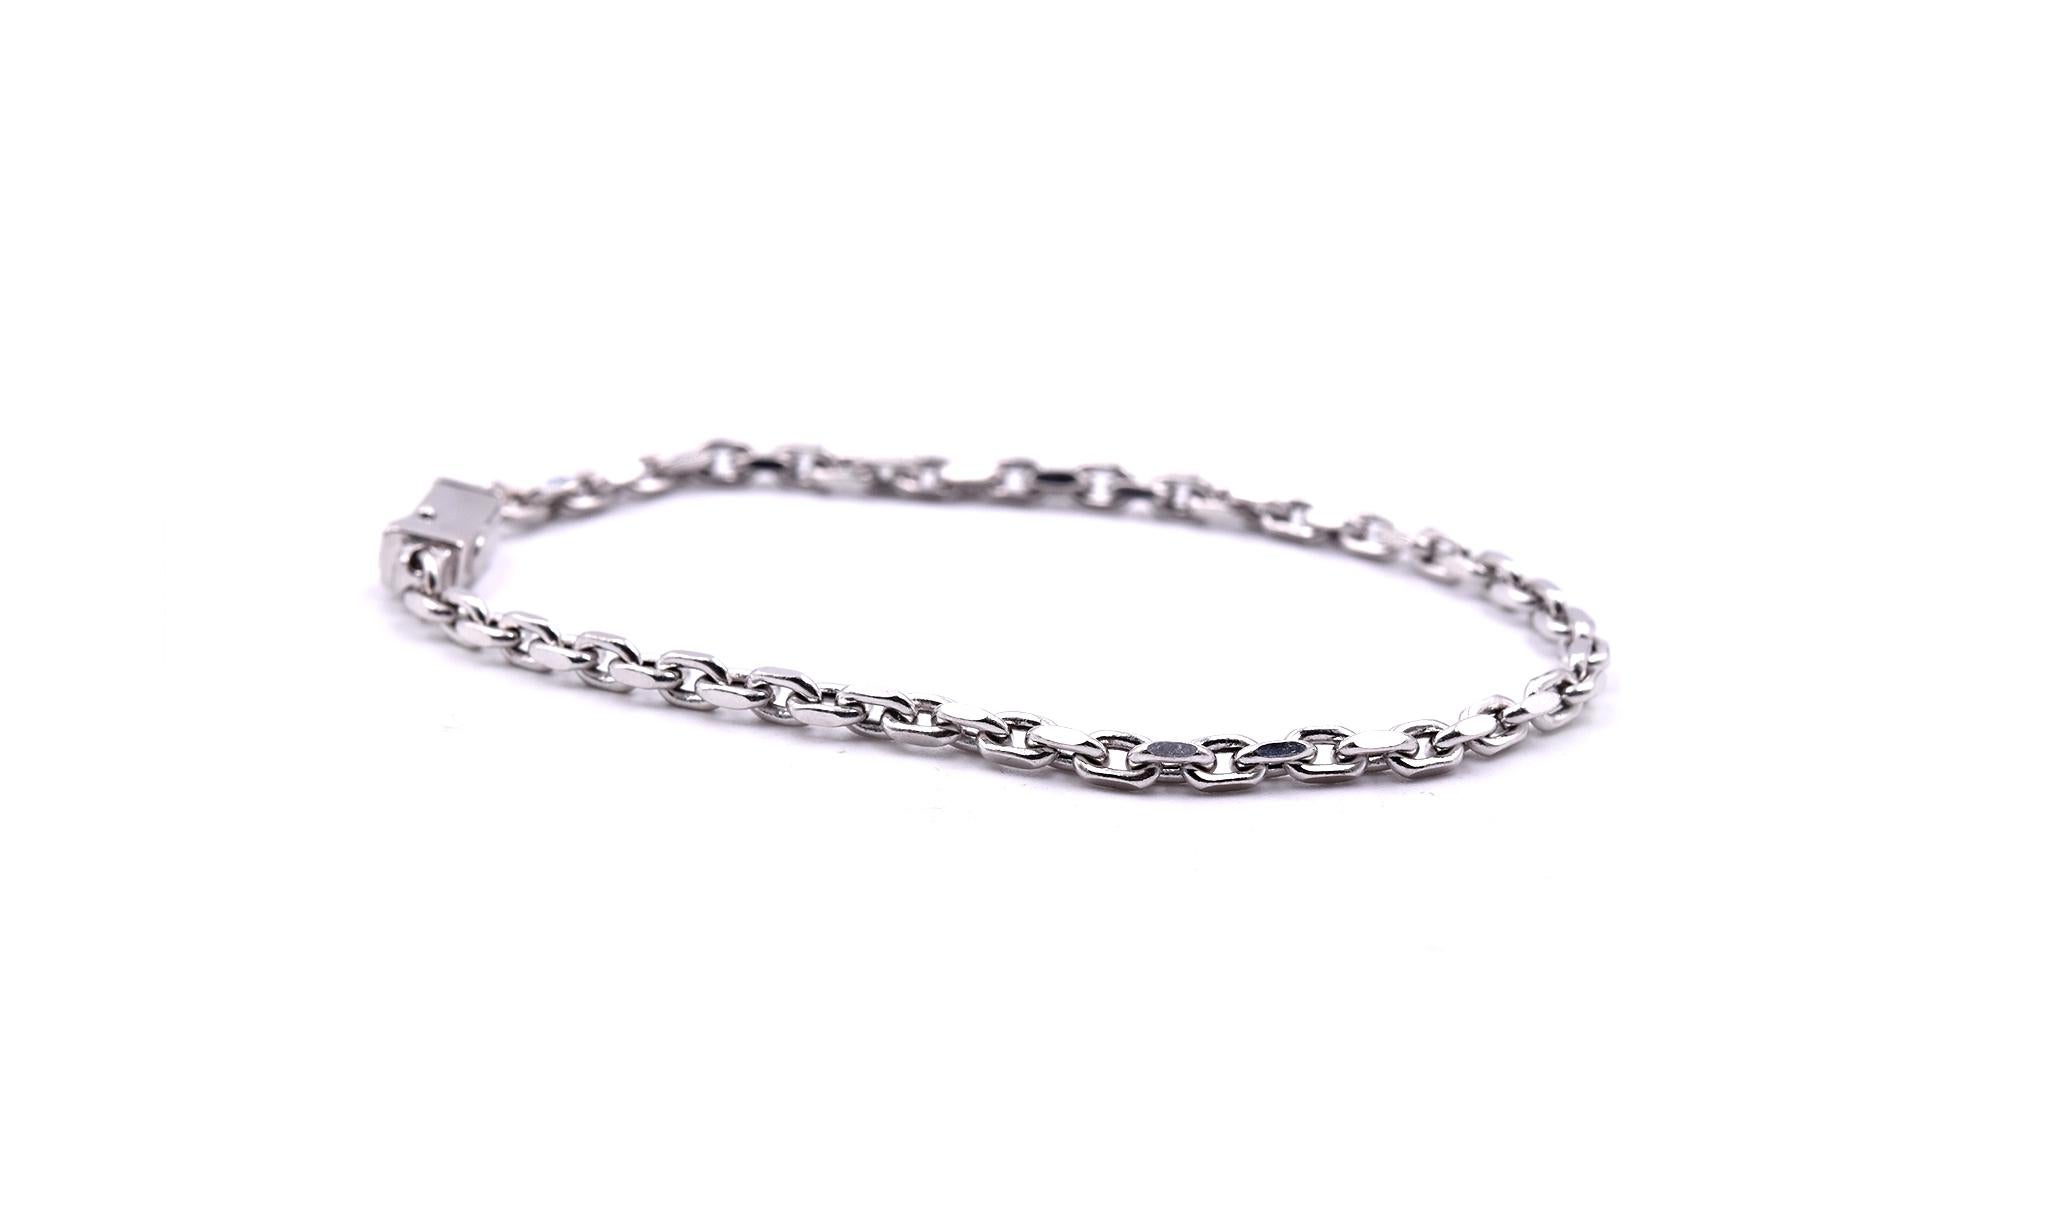 Designer: Baraka Brev
Material: 18k white gold
Dimensions: bracelet will fit 7 ¼ -inch wrist and it is 2.97mm wide
Weight: 5.90 grams
